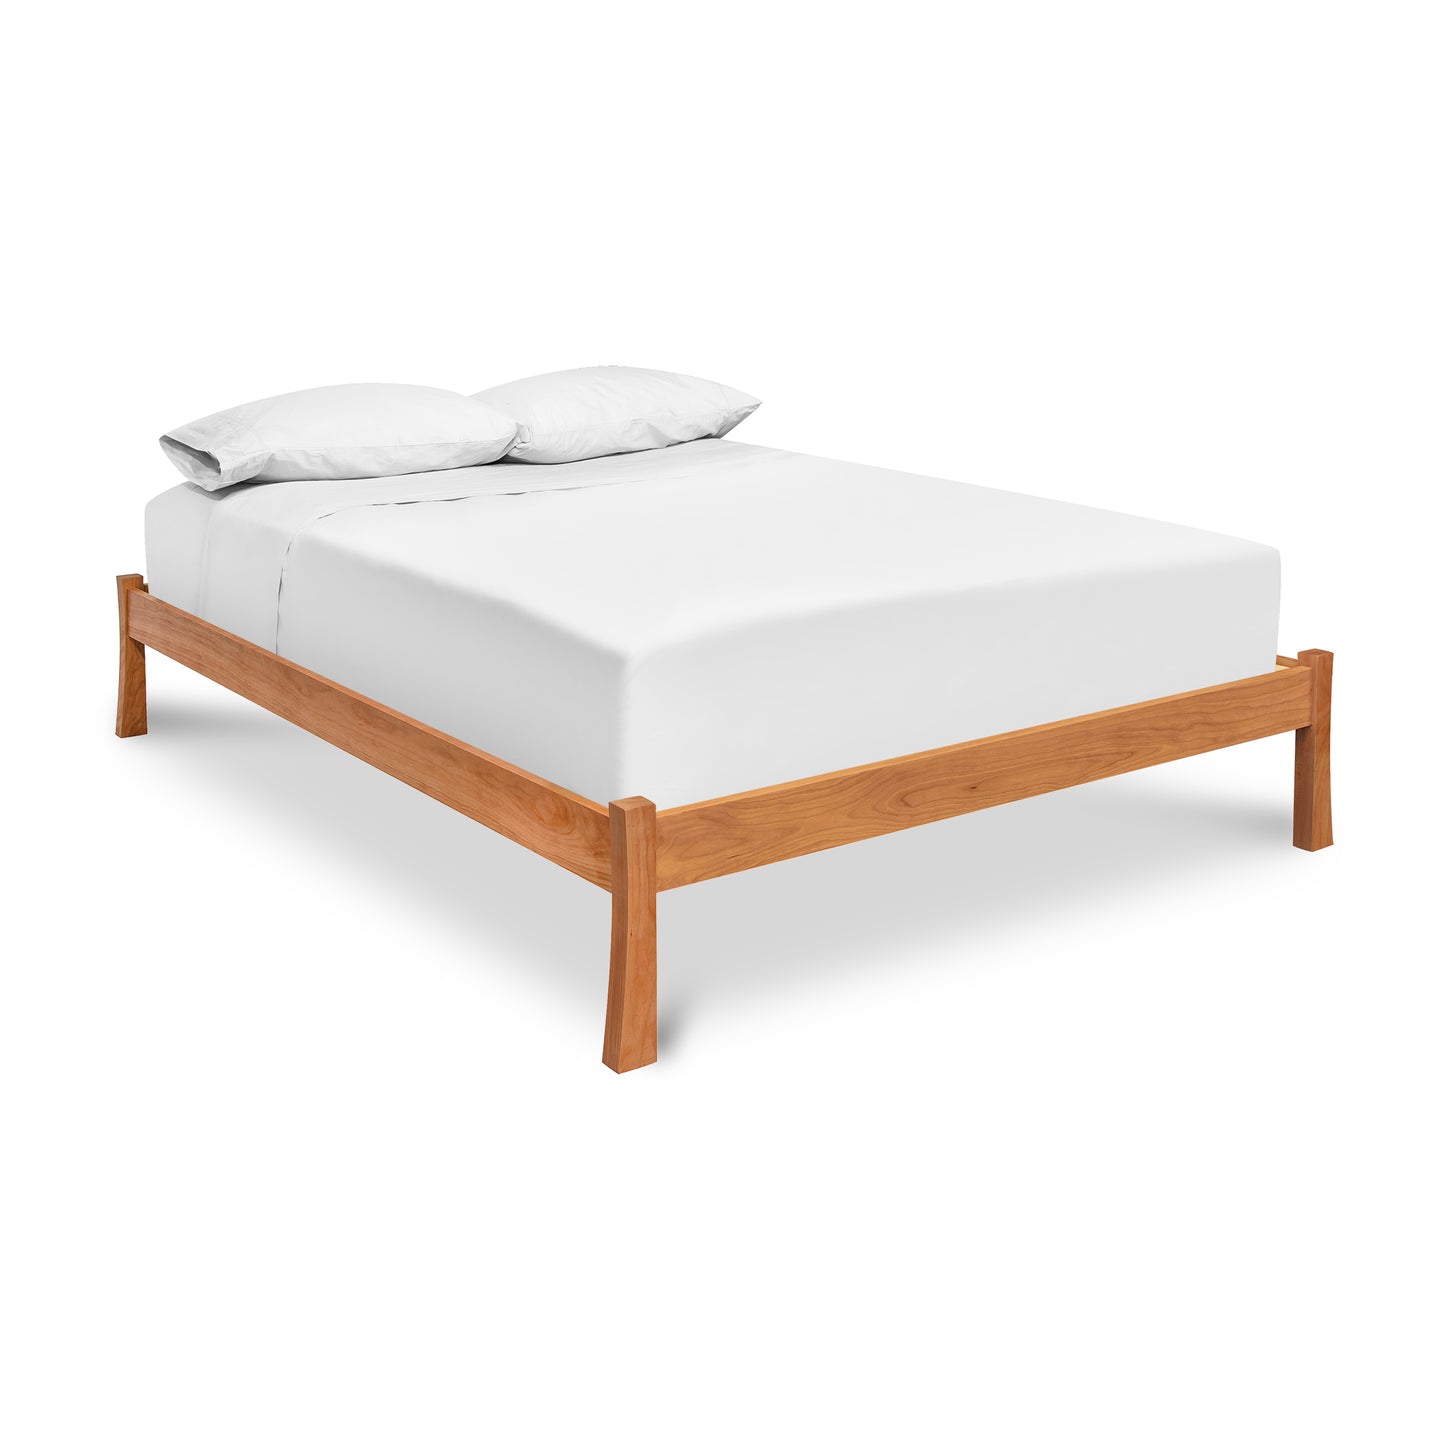 A Vermont Furniture Designs Contemporary Craftsman Studio-Style Platform Bed with white sheets, offering a minimalist look for a contemporary bedroom.